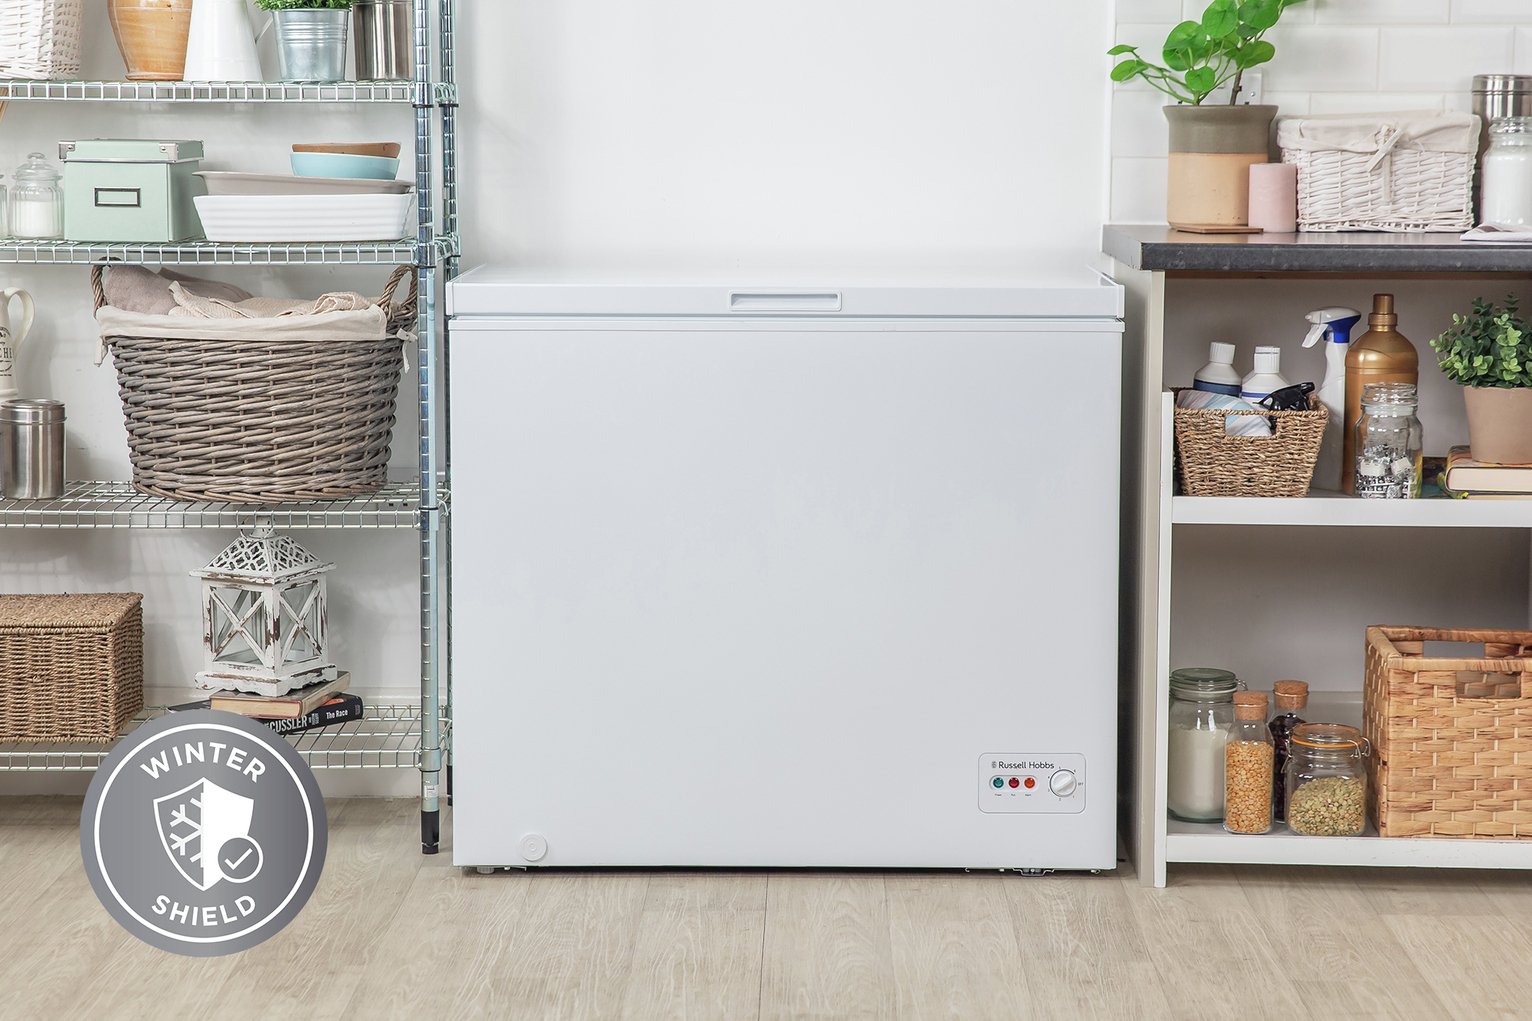 Russell Hobbs RHCF200 Chest Freezer Review